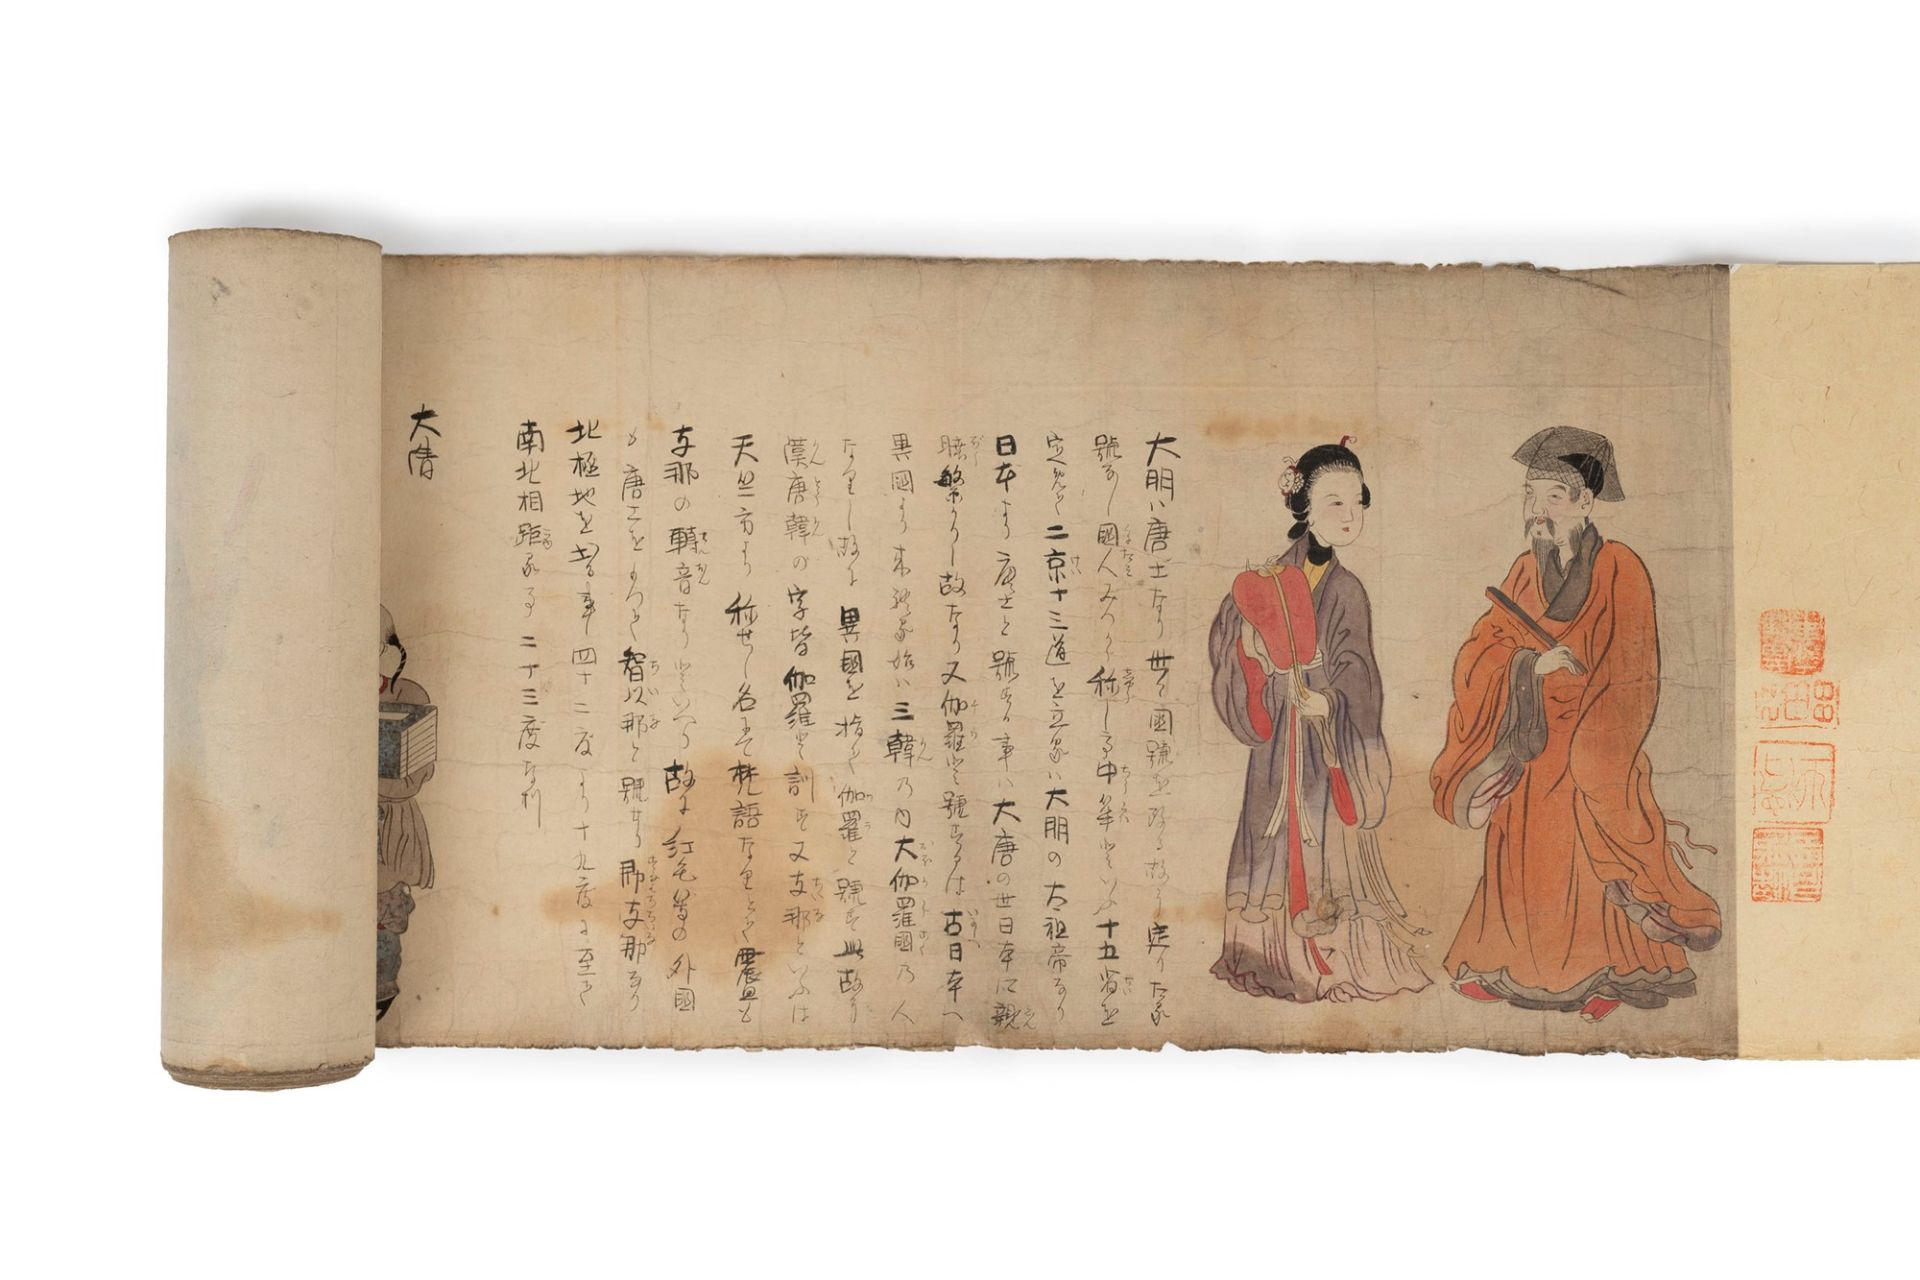 Emakimono painted on paper representing characters and customs of the various populations of the wor